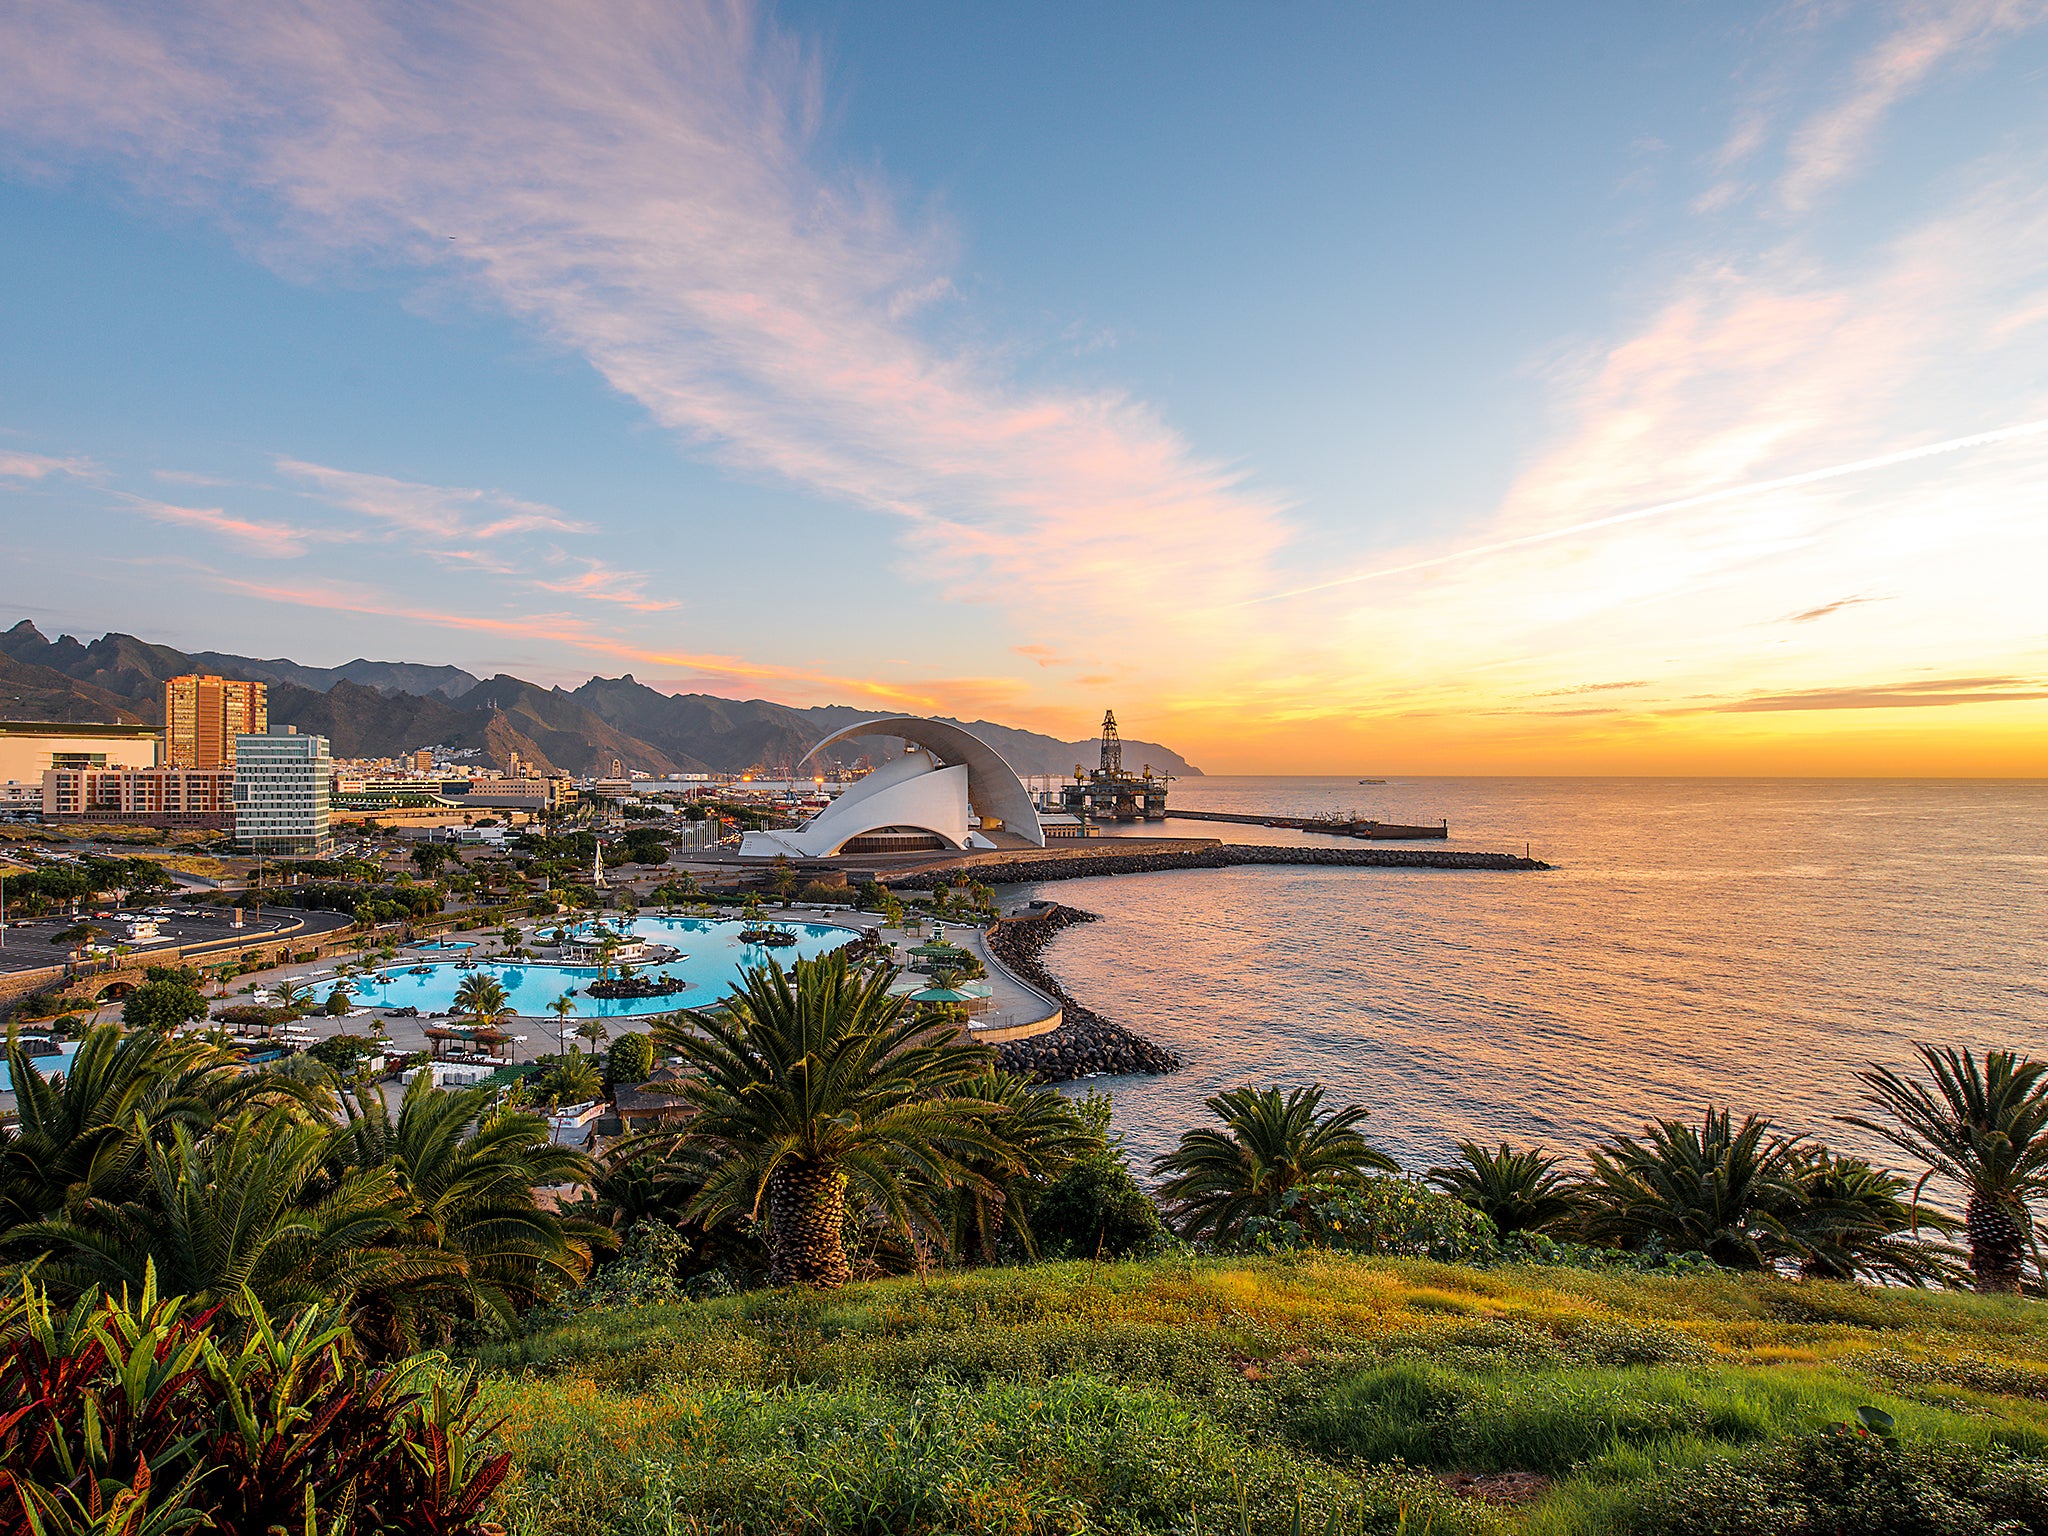 Canary Islands holidays are selling for under £200